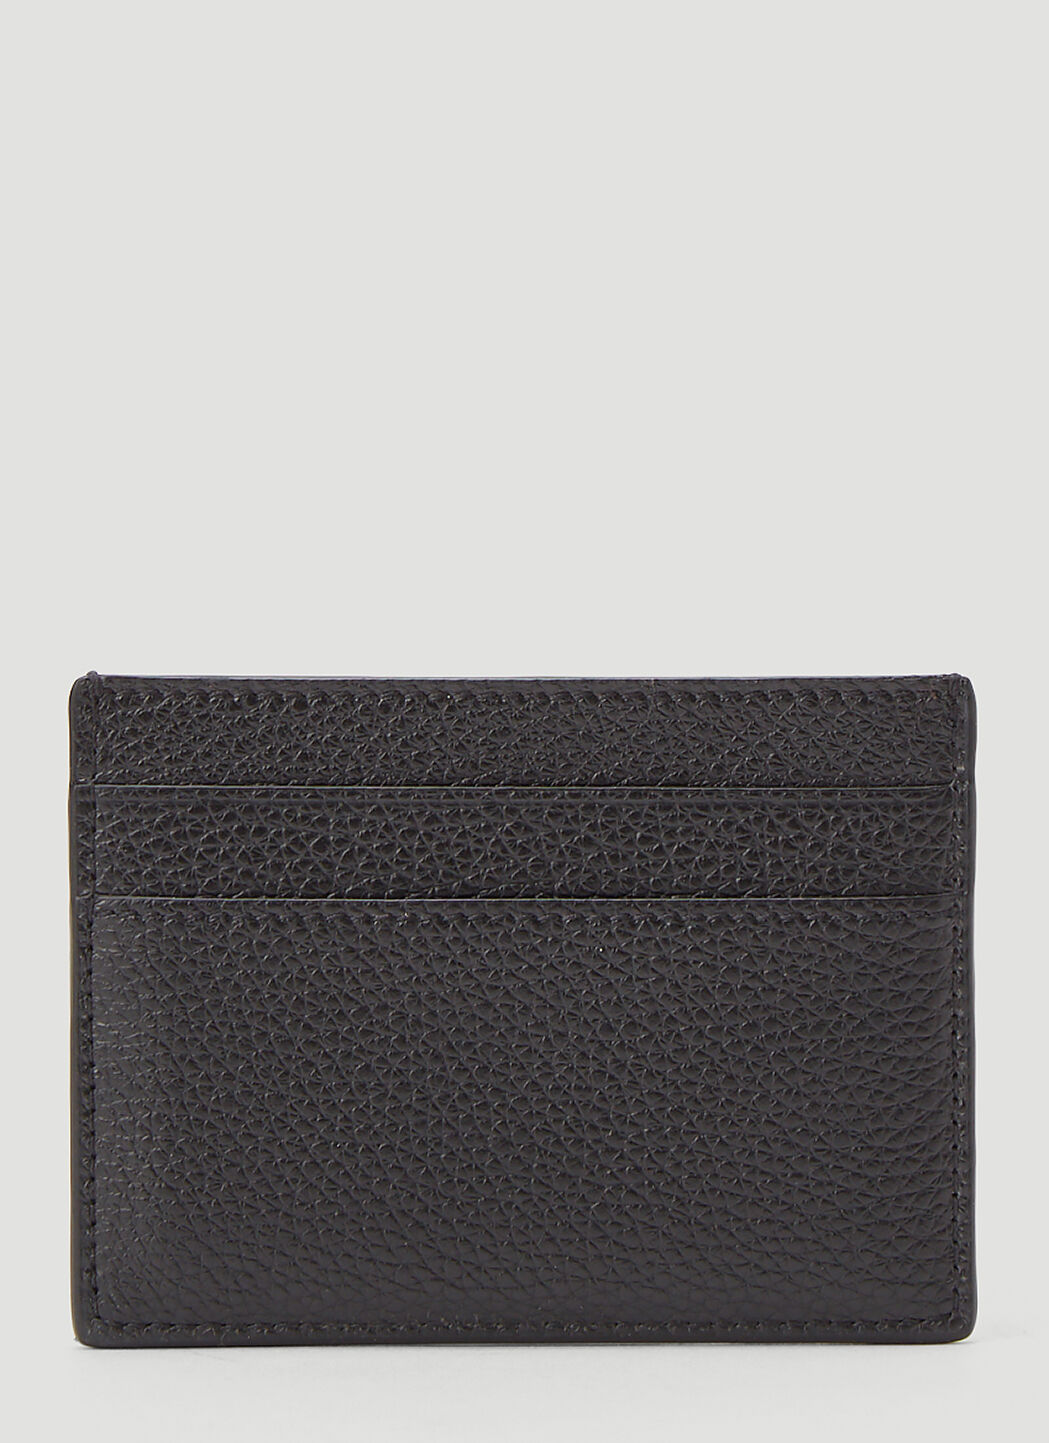 Shop Balenciaga Neo Classic Flap Coin And Card Holder Crocodile Embossed   Saks Fifth Avenue